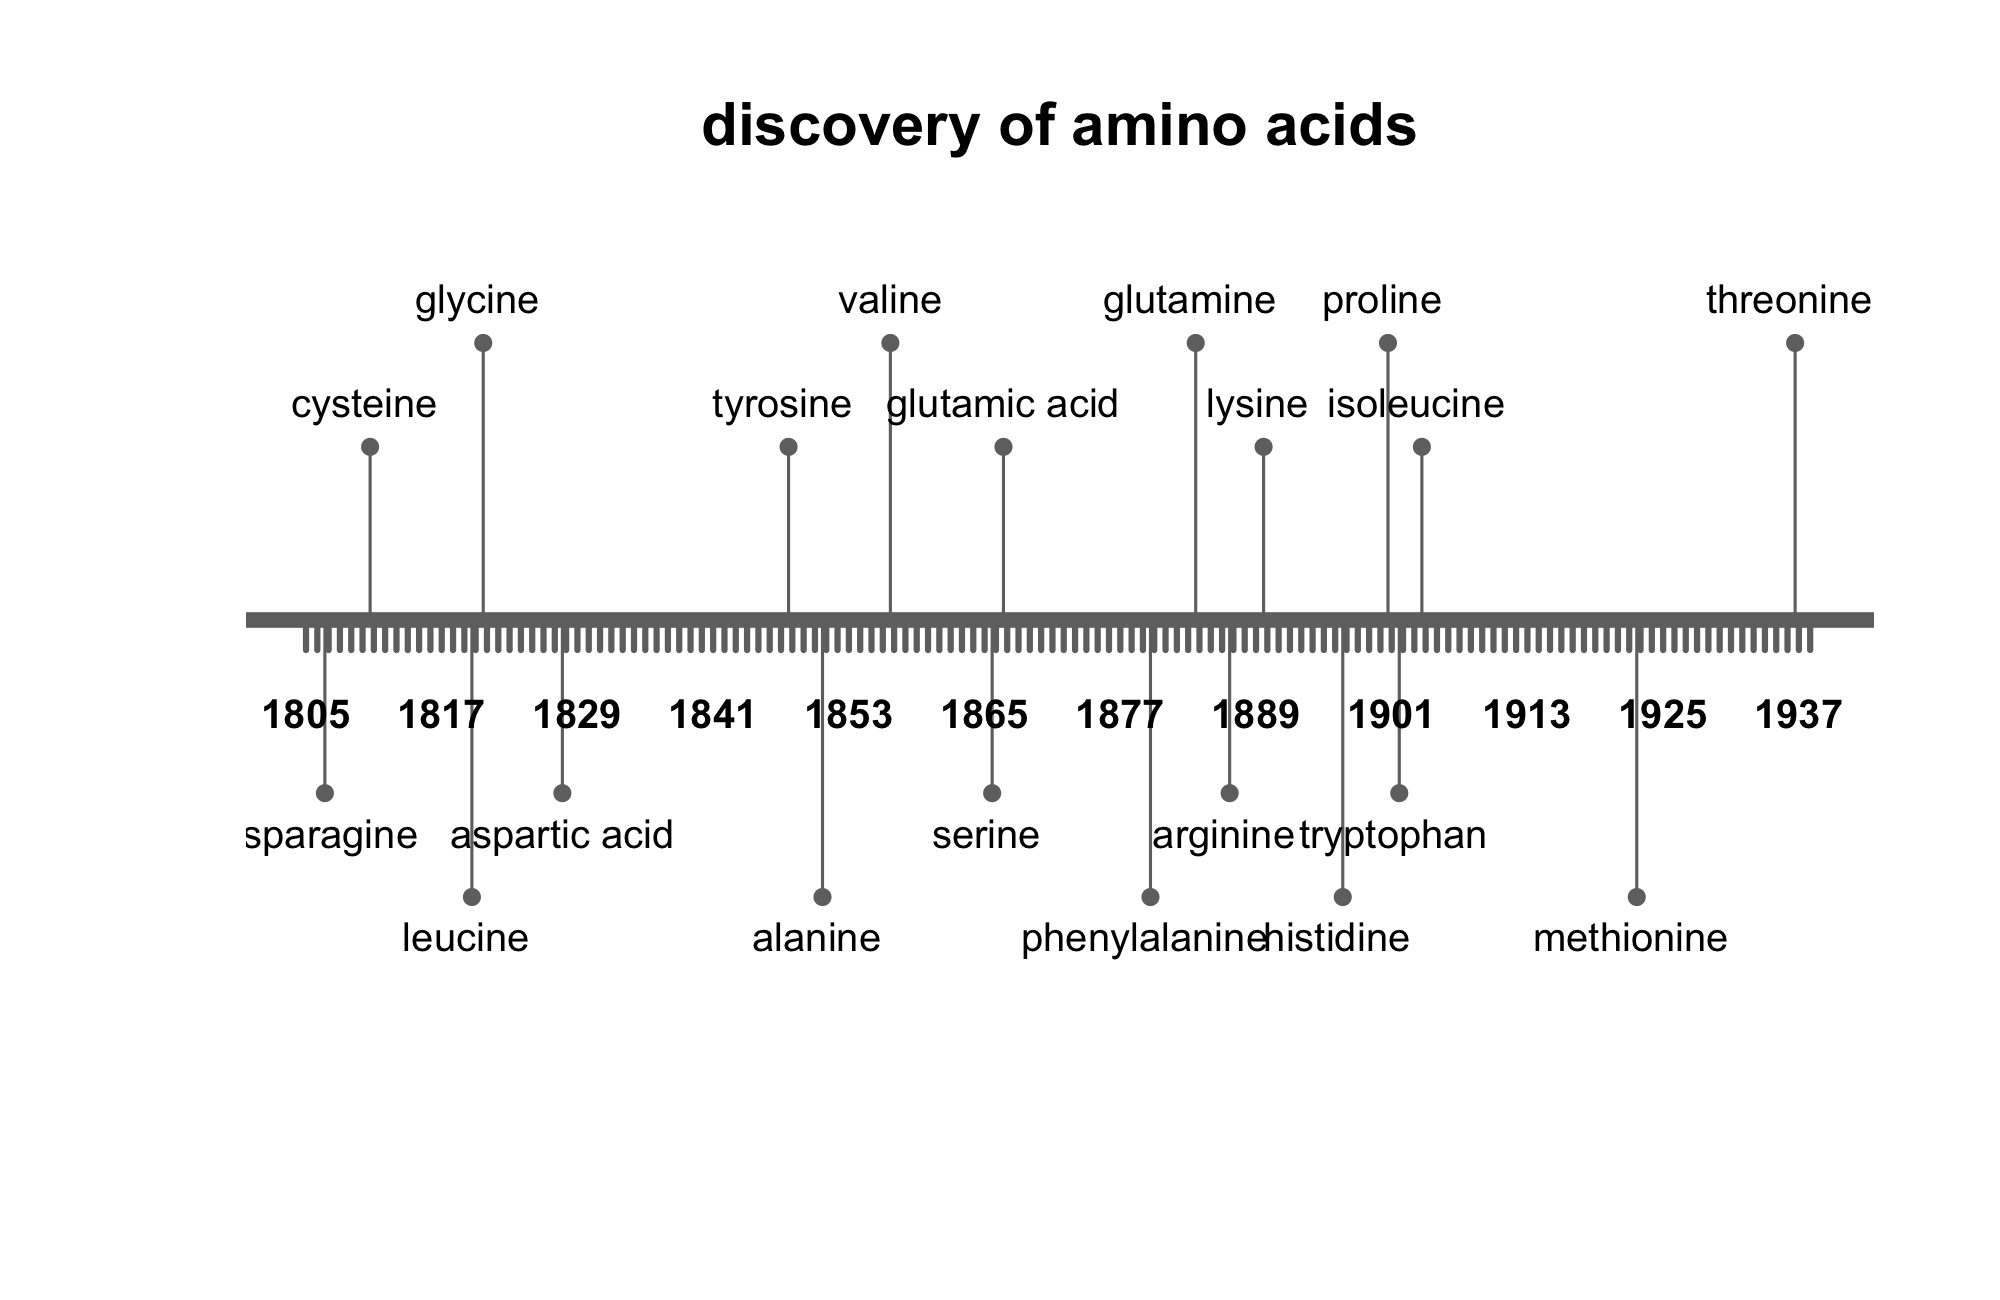 Timeline of discovery of amino acids from asparagine in 1805 to threonine in 1937